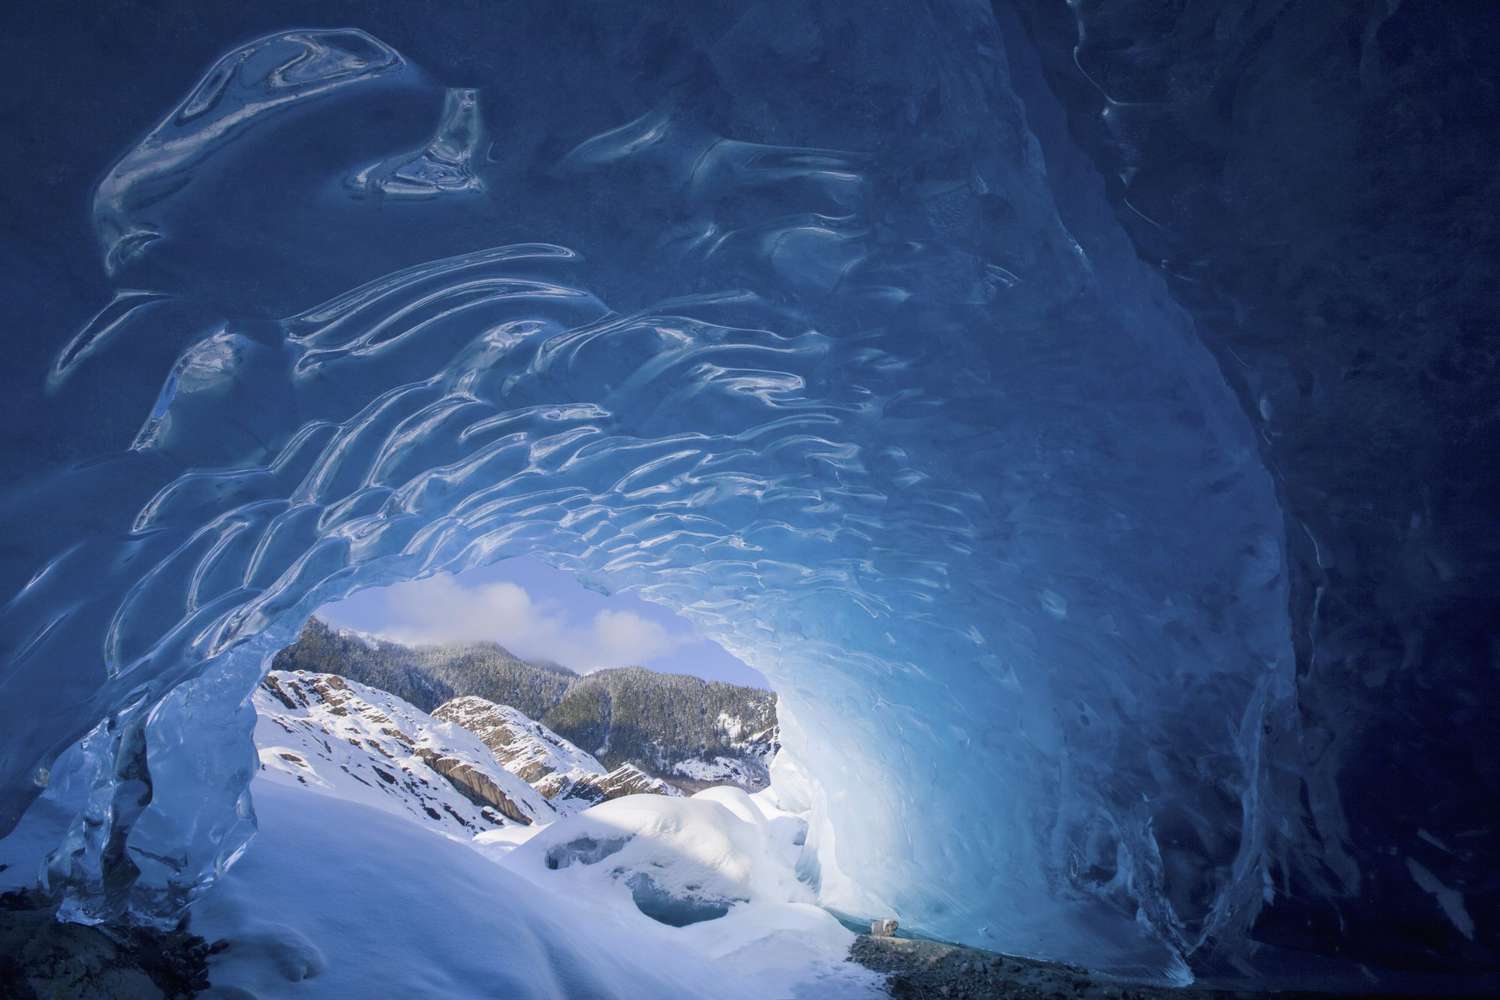 view from inside an ice cave looking outward at the snow-covered landscape mendenhall glacier near juneau in Alaska